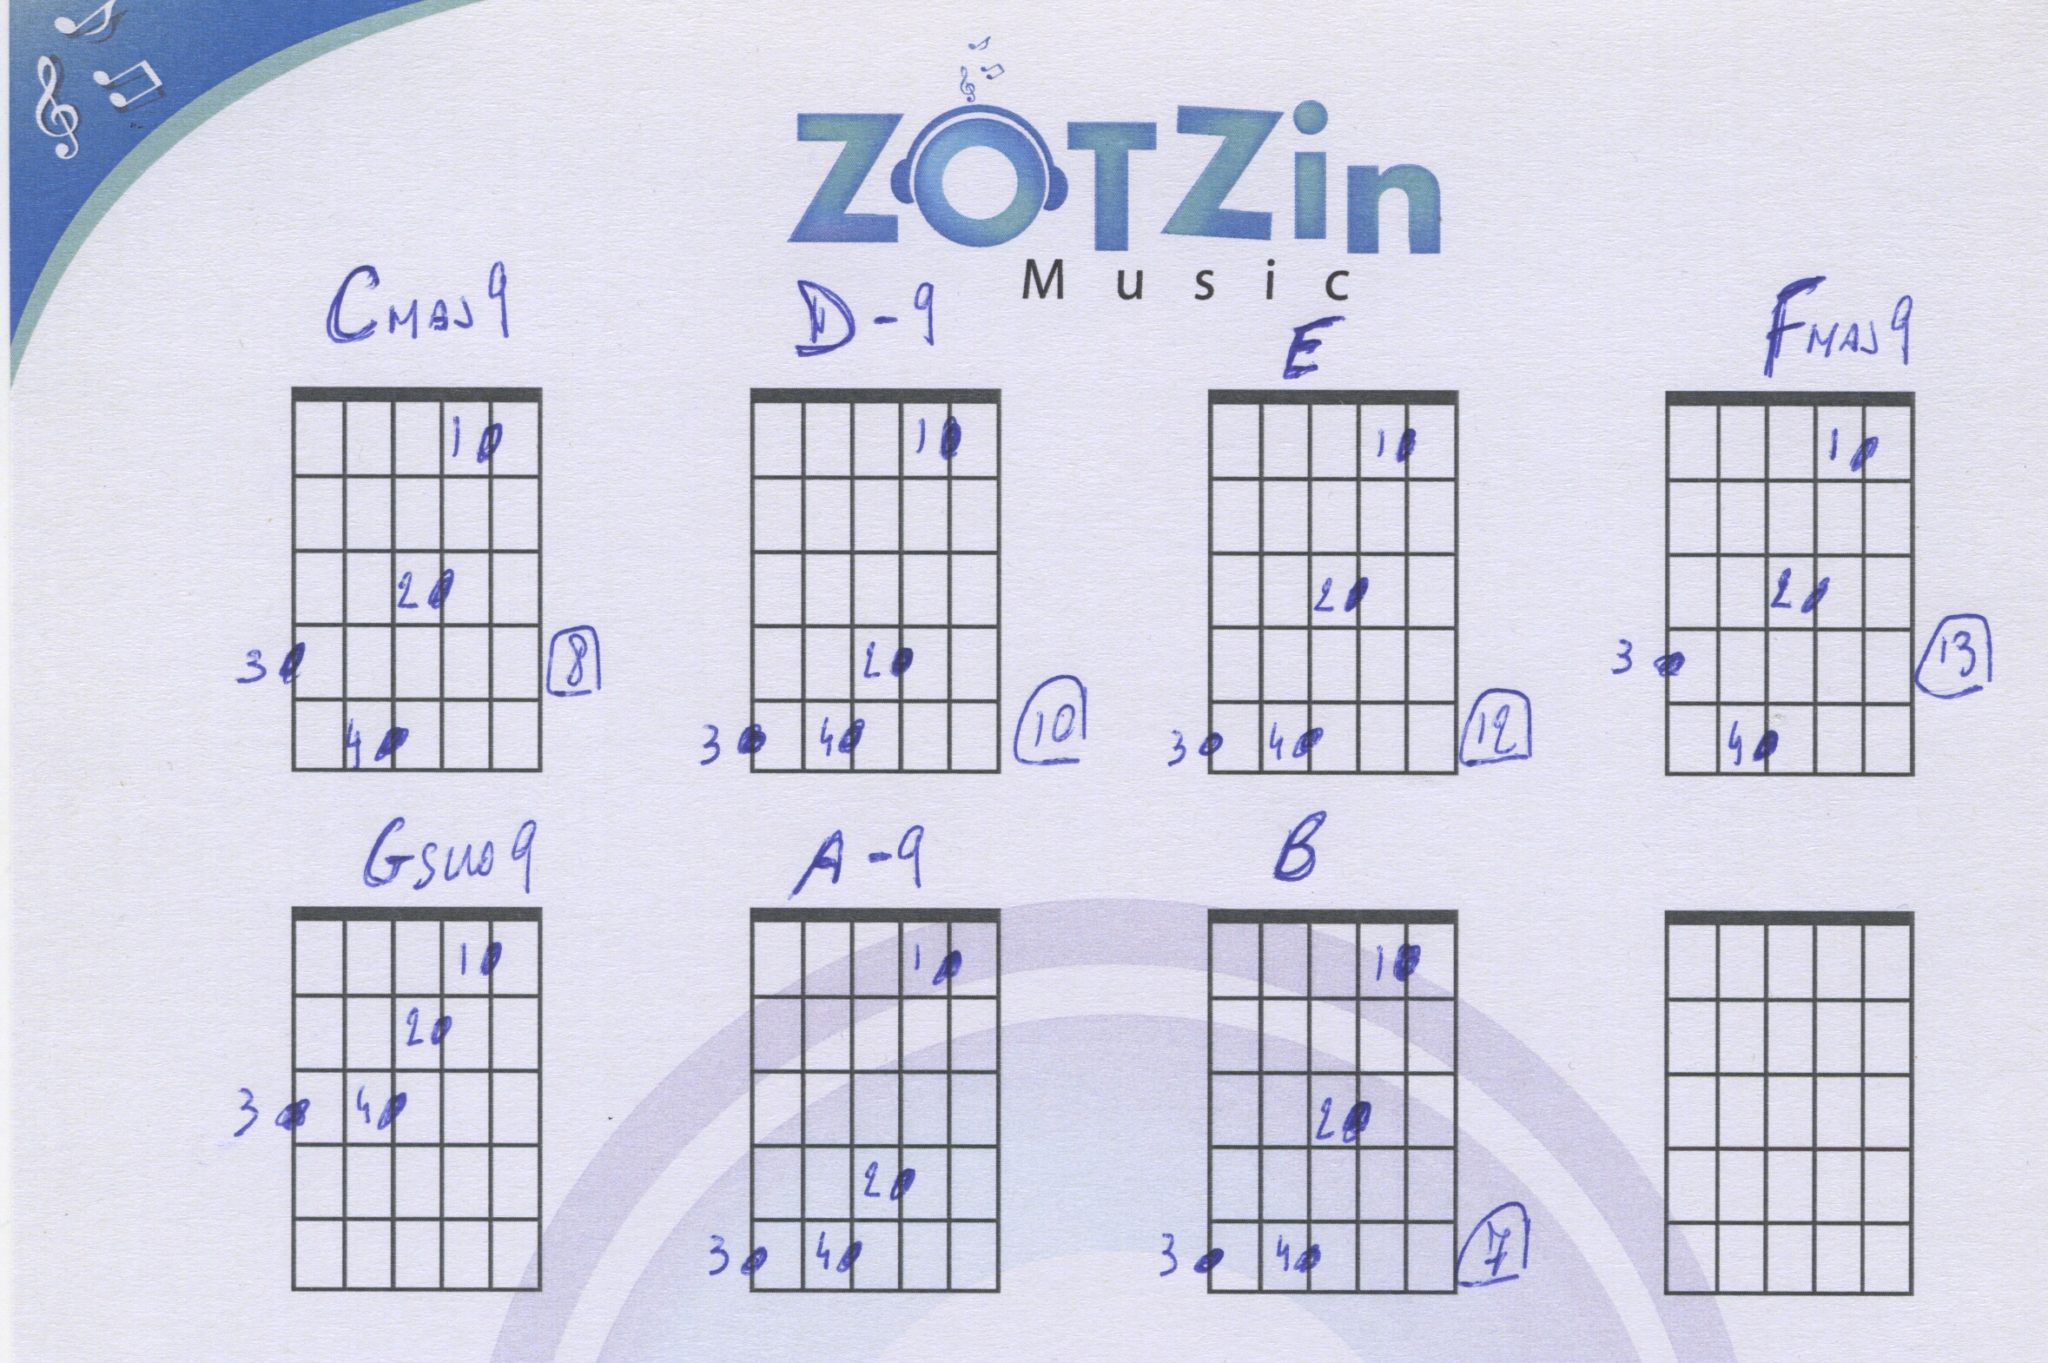 These are some really great sounding 9th chord voicings